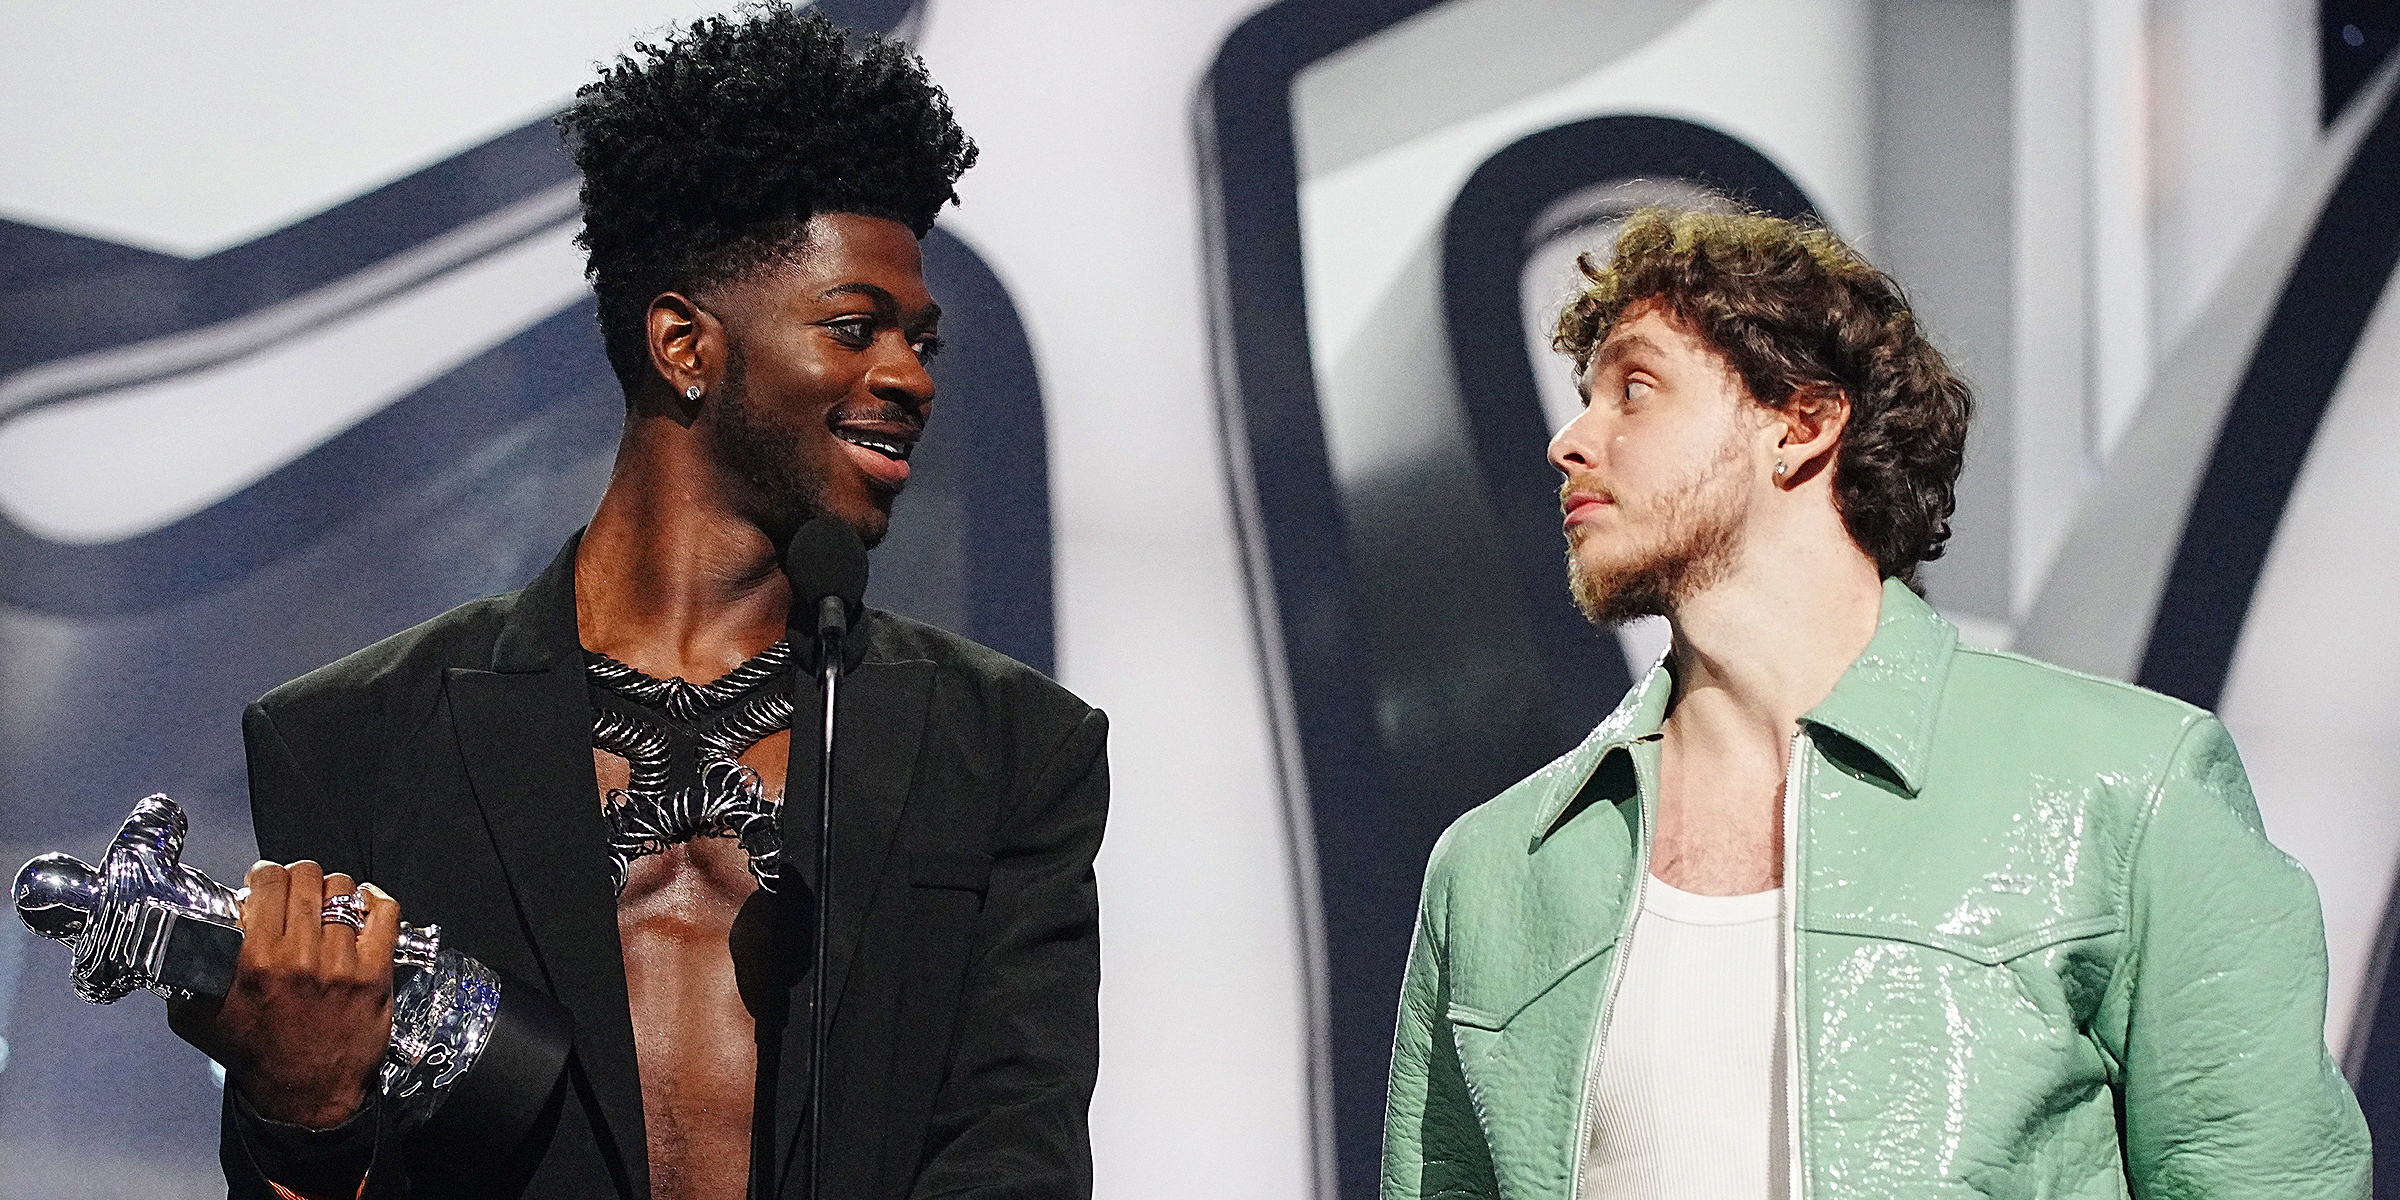 Lil Nas X and Jack Harlow. | Source: Getty Images